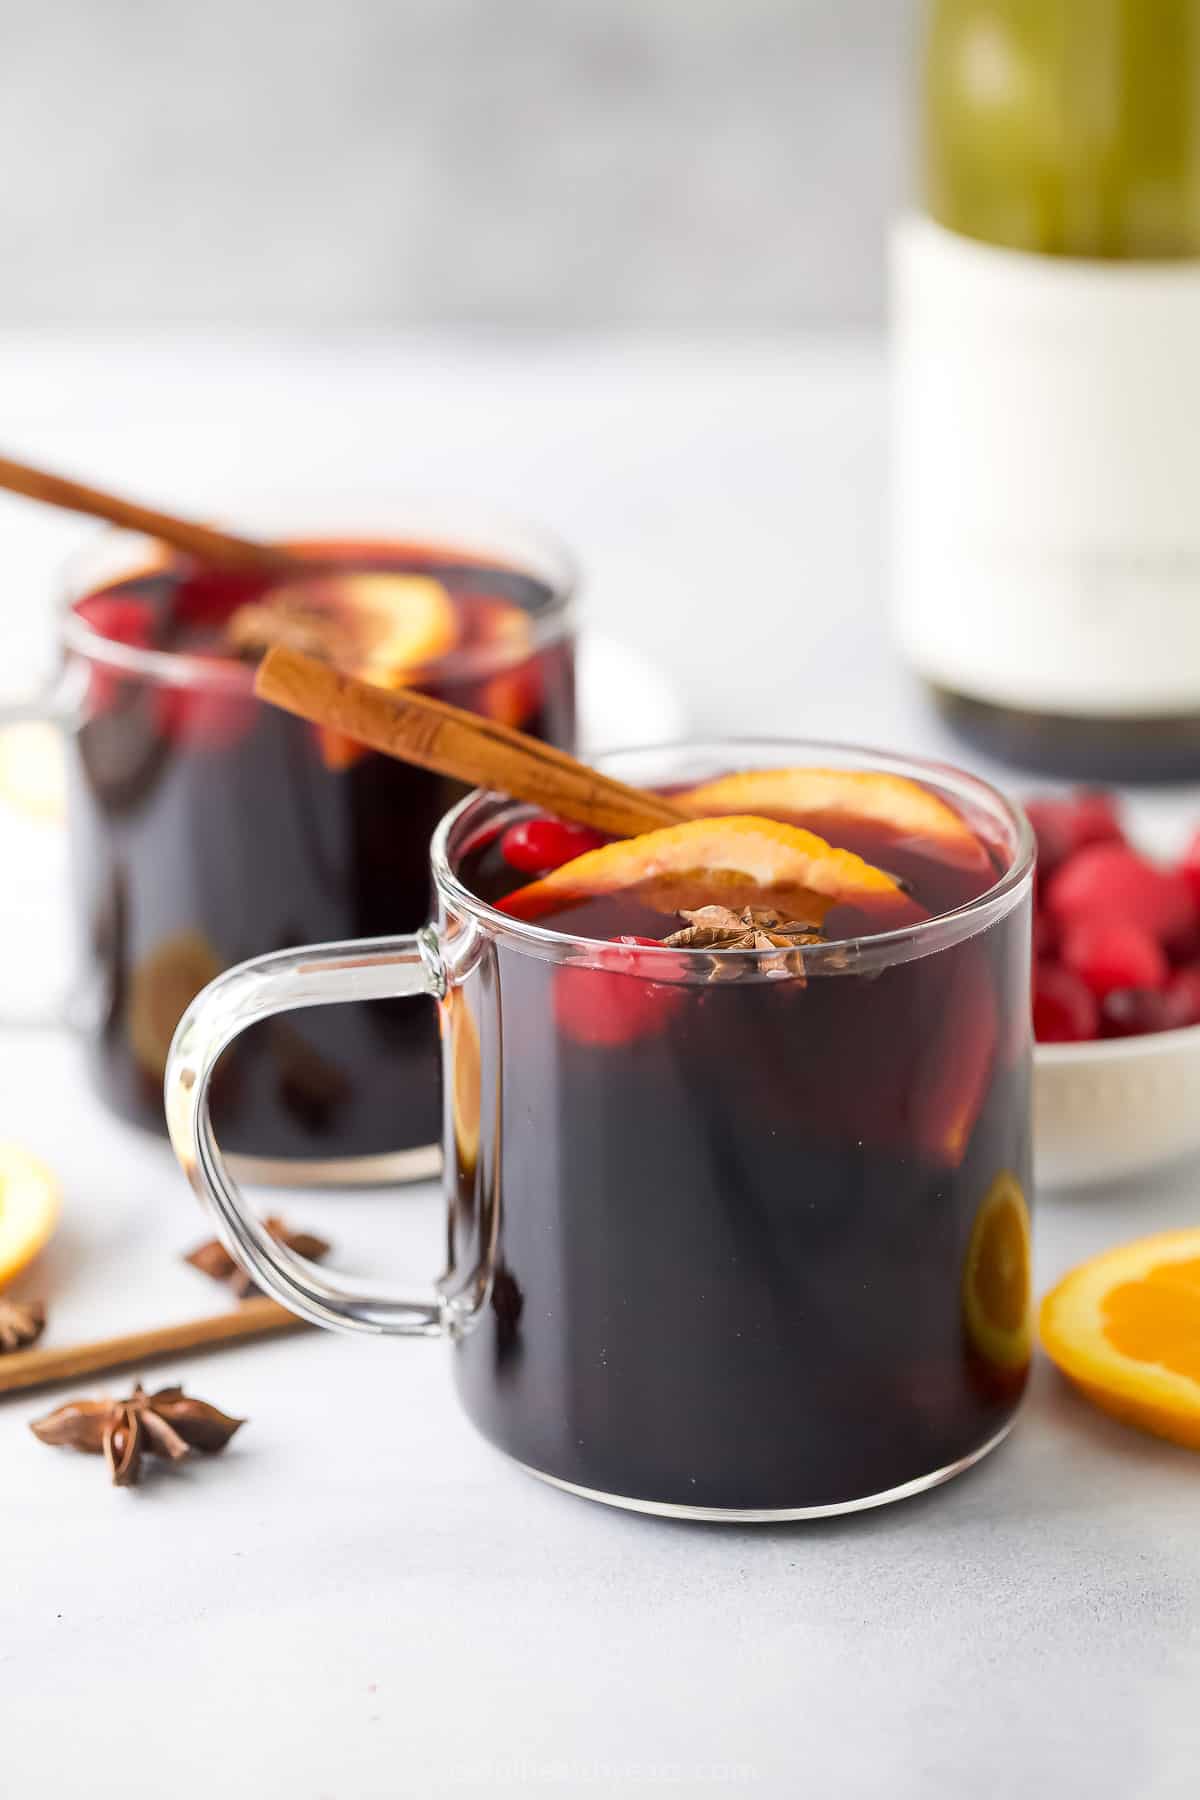 Warm holiday drink in a glass with sliced oranges and a cinnamon stick stirrer. 